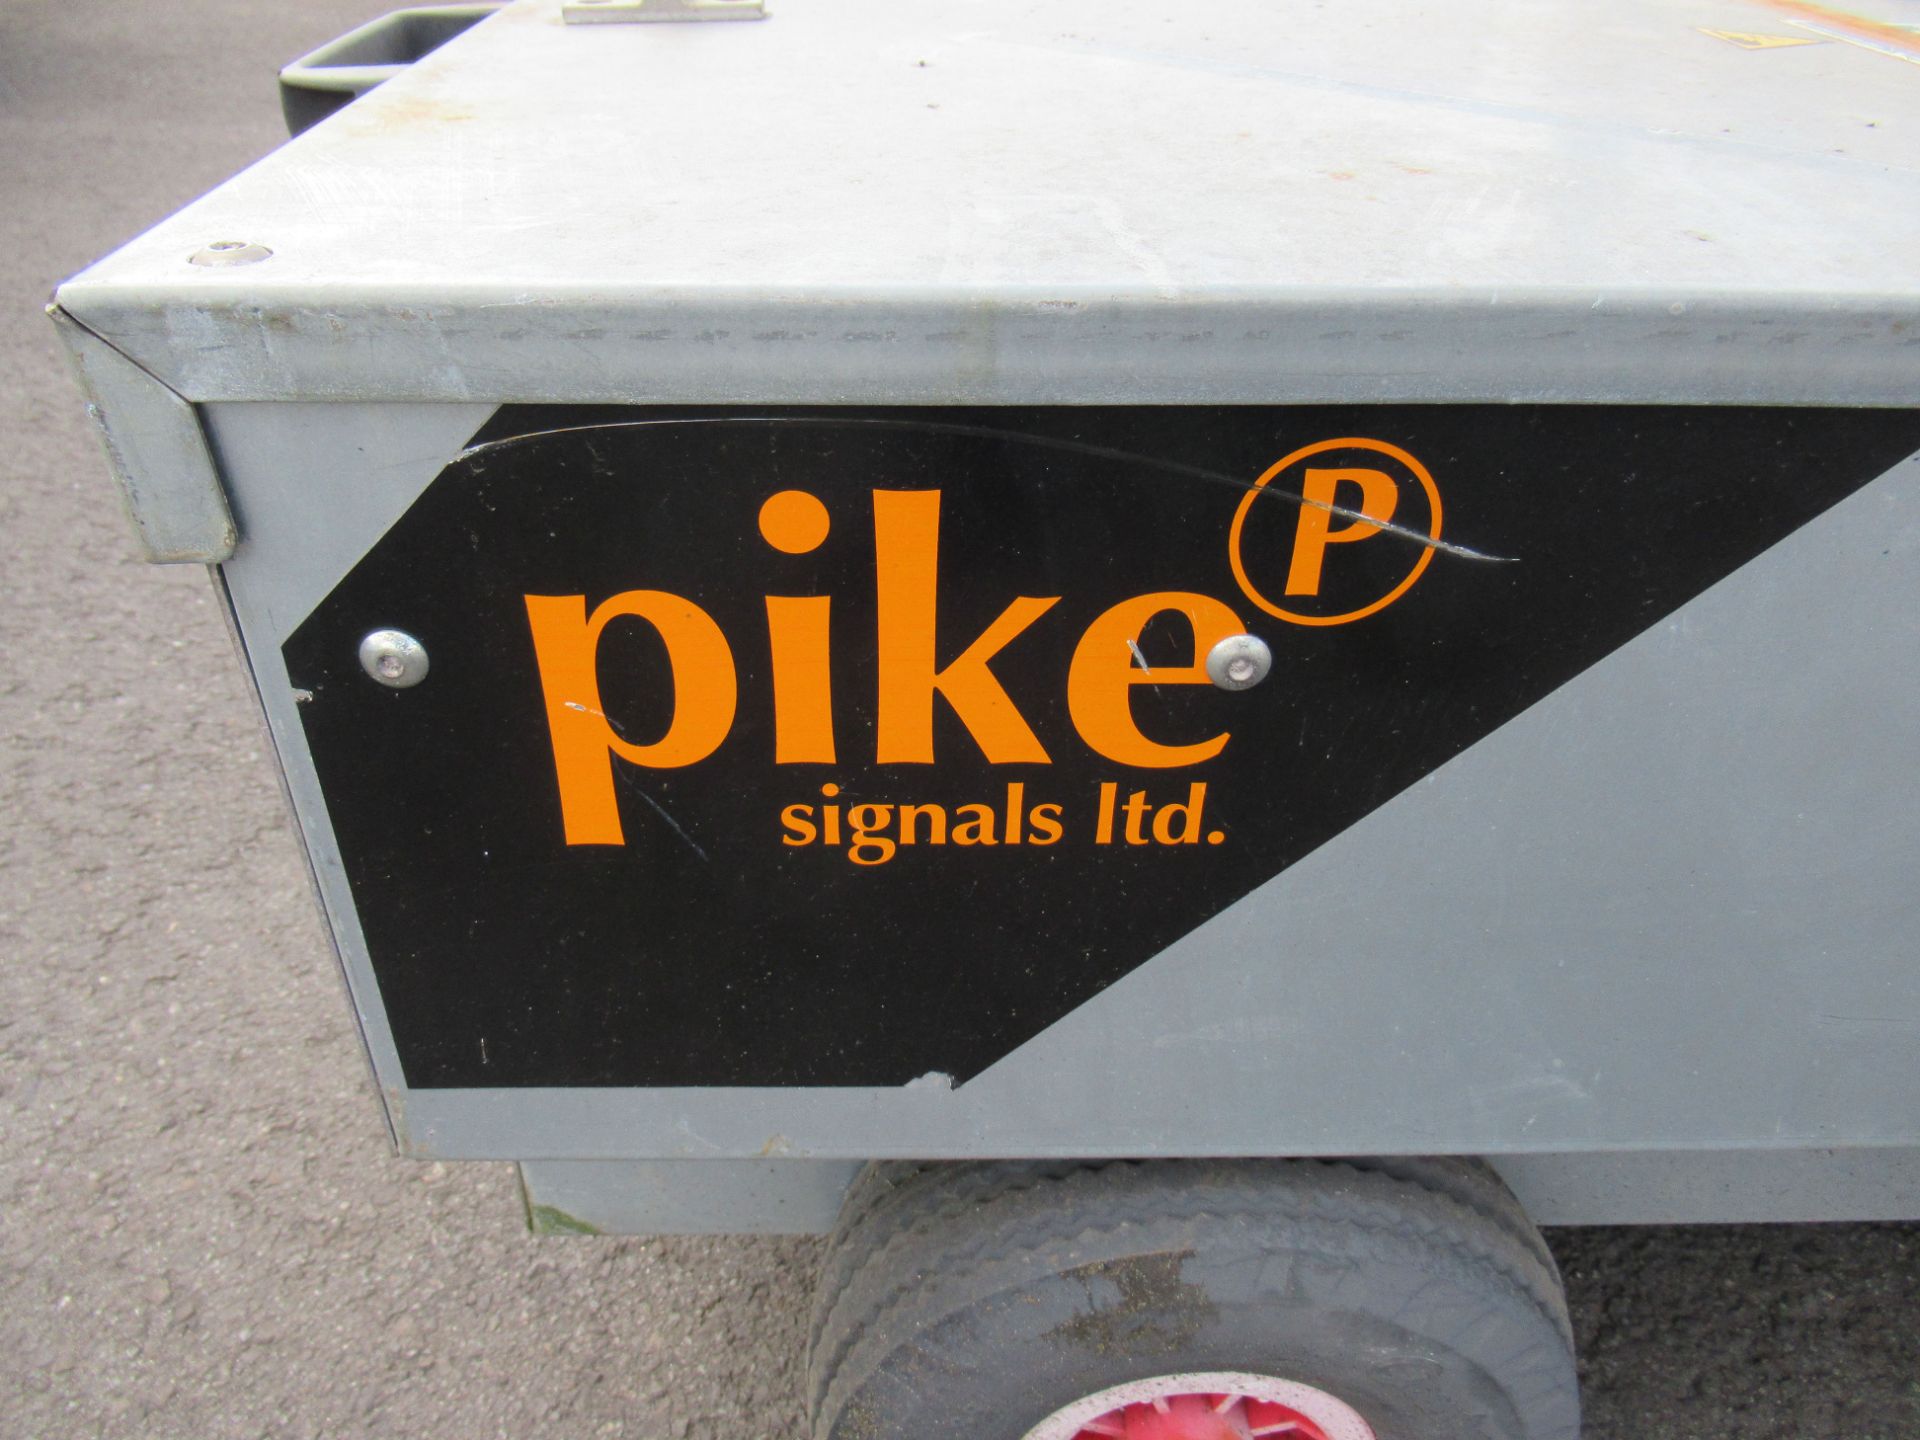 A Pair of Pike Signals Ltd "Pedestrian" Battery Powered Portable Light Units - Image 3 of 7